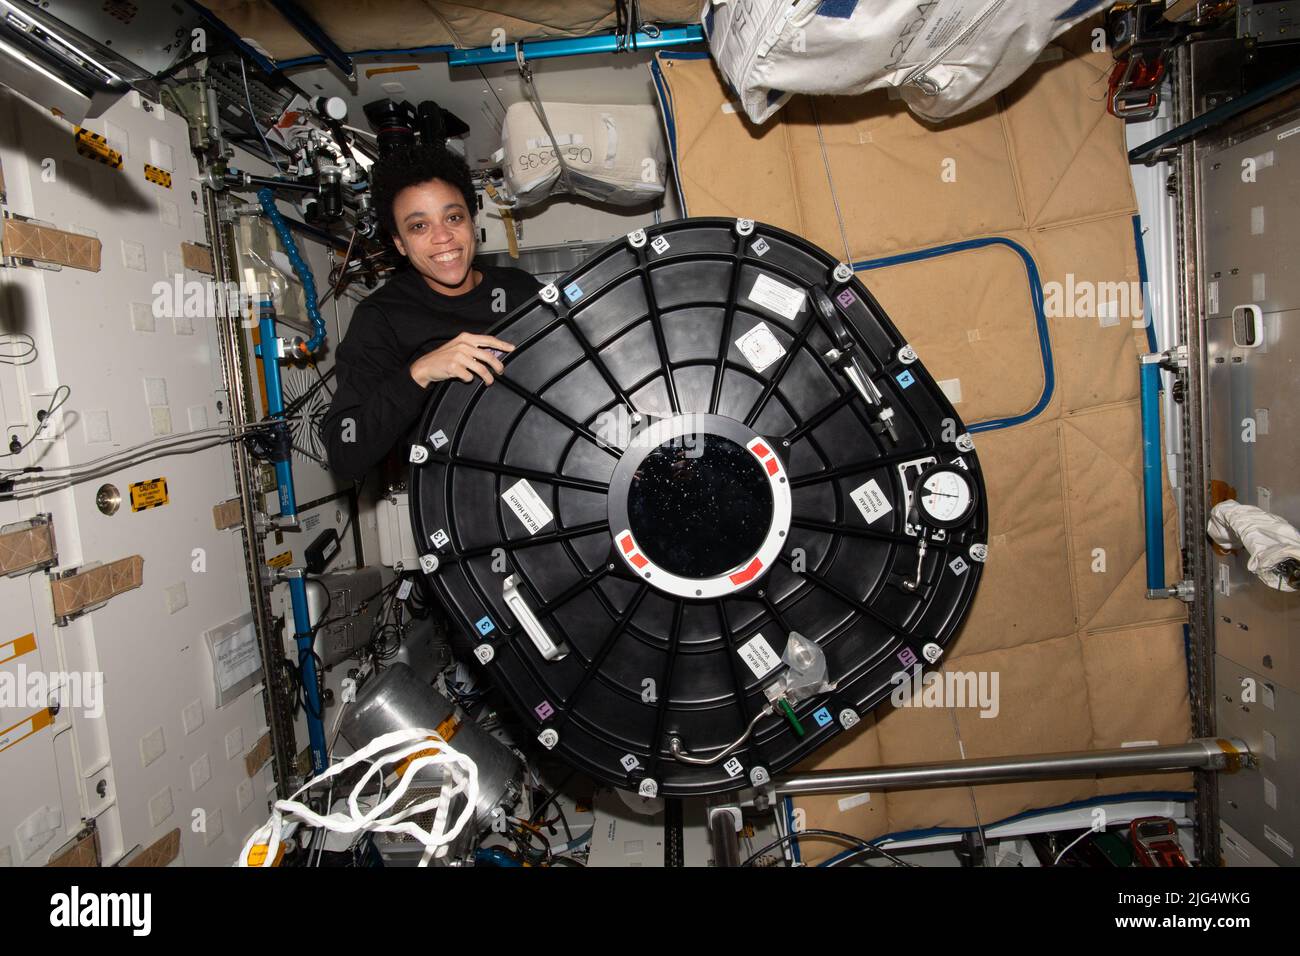 NASA Expedition 67 Flight Engineer Jessica Watkins poses with the hatch cover for the Bigelow Expandable Activity Module inside the Tranquility module aboard the International Space Station, June 10, 2022 in Earth Orbit. Stock Photo